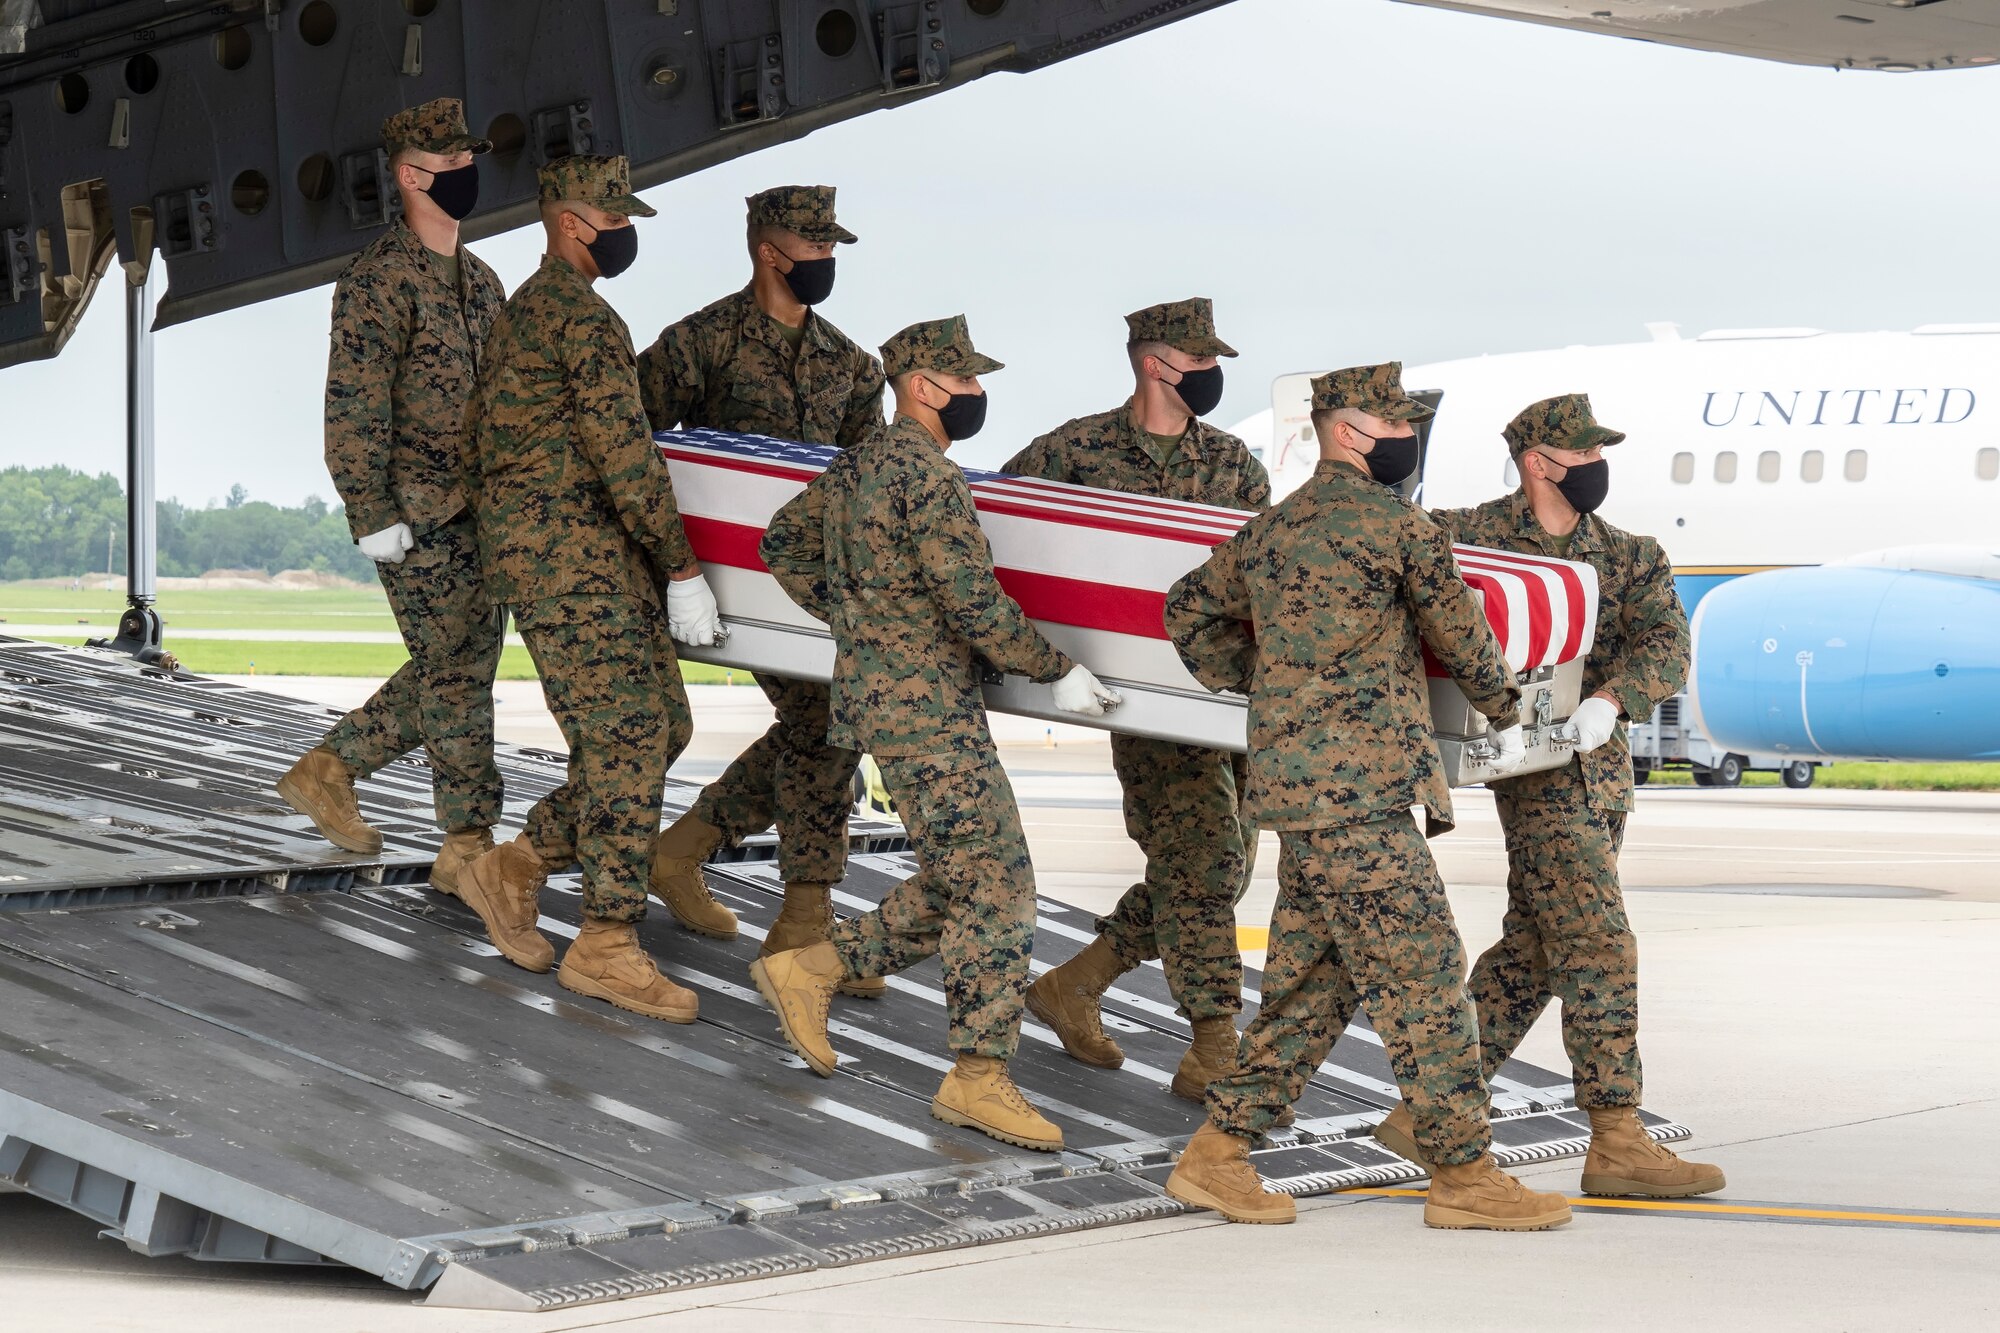 A U.S. Marine Corps carry team transfers the remains of Marine Corps Lance Cpl. Dylan R. Merola of Rancho Cucamonga, California, Aug. 29, 2021 at Dover Air Force Base, Delaware. Merola was assigned to 2nd Battalion, 1st Marine Regiment, 1st Marine Division, I Marine Expeditionary Force, Camp Pendleton, California. (U.S. Air Force photo by Jason Minto)